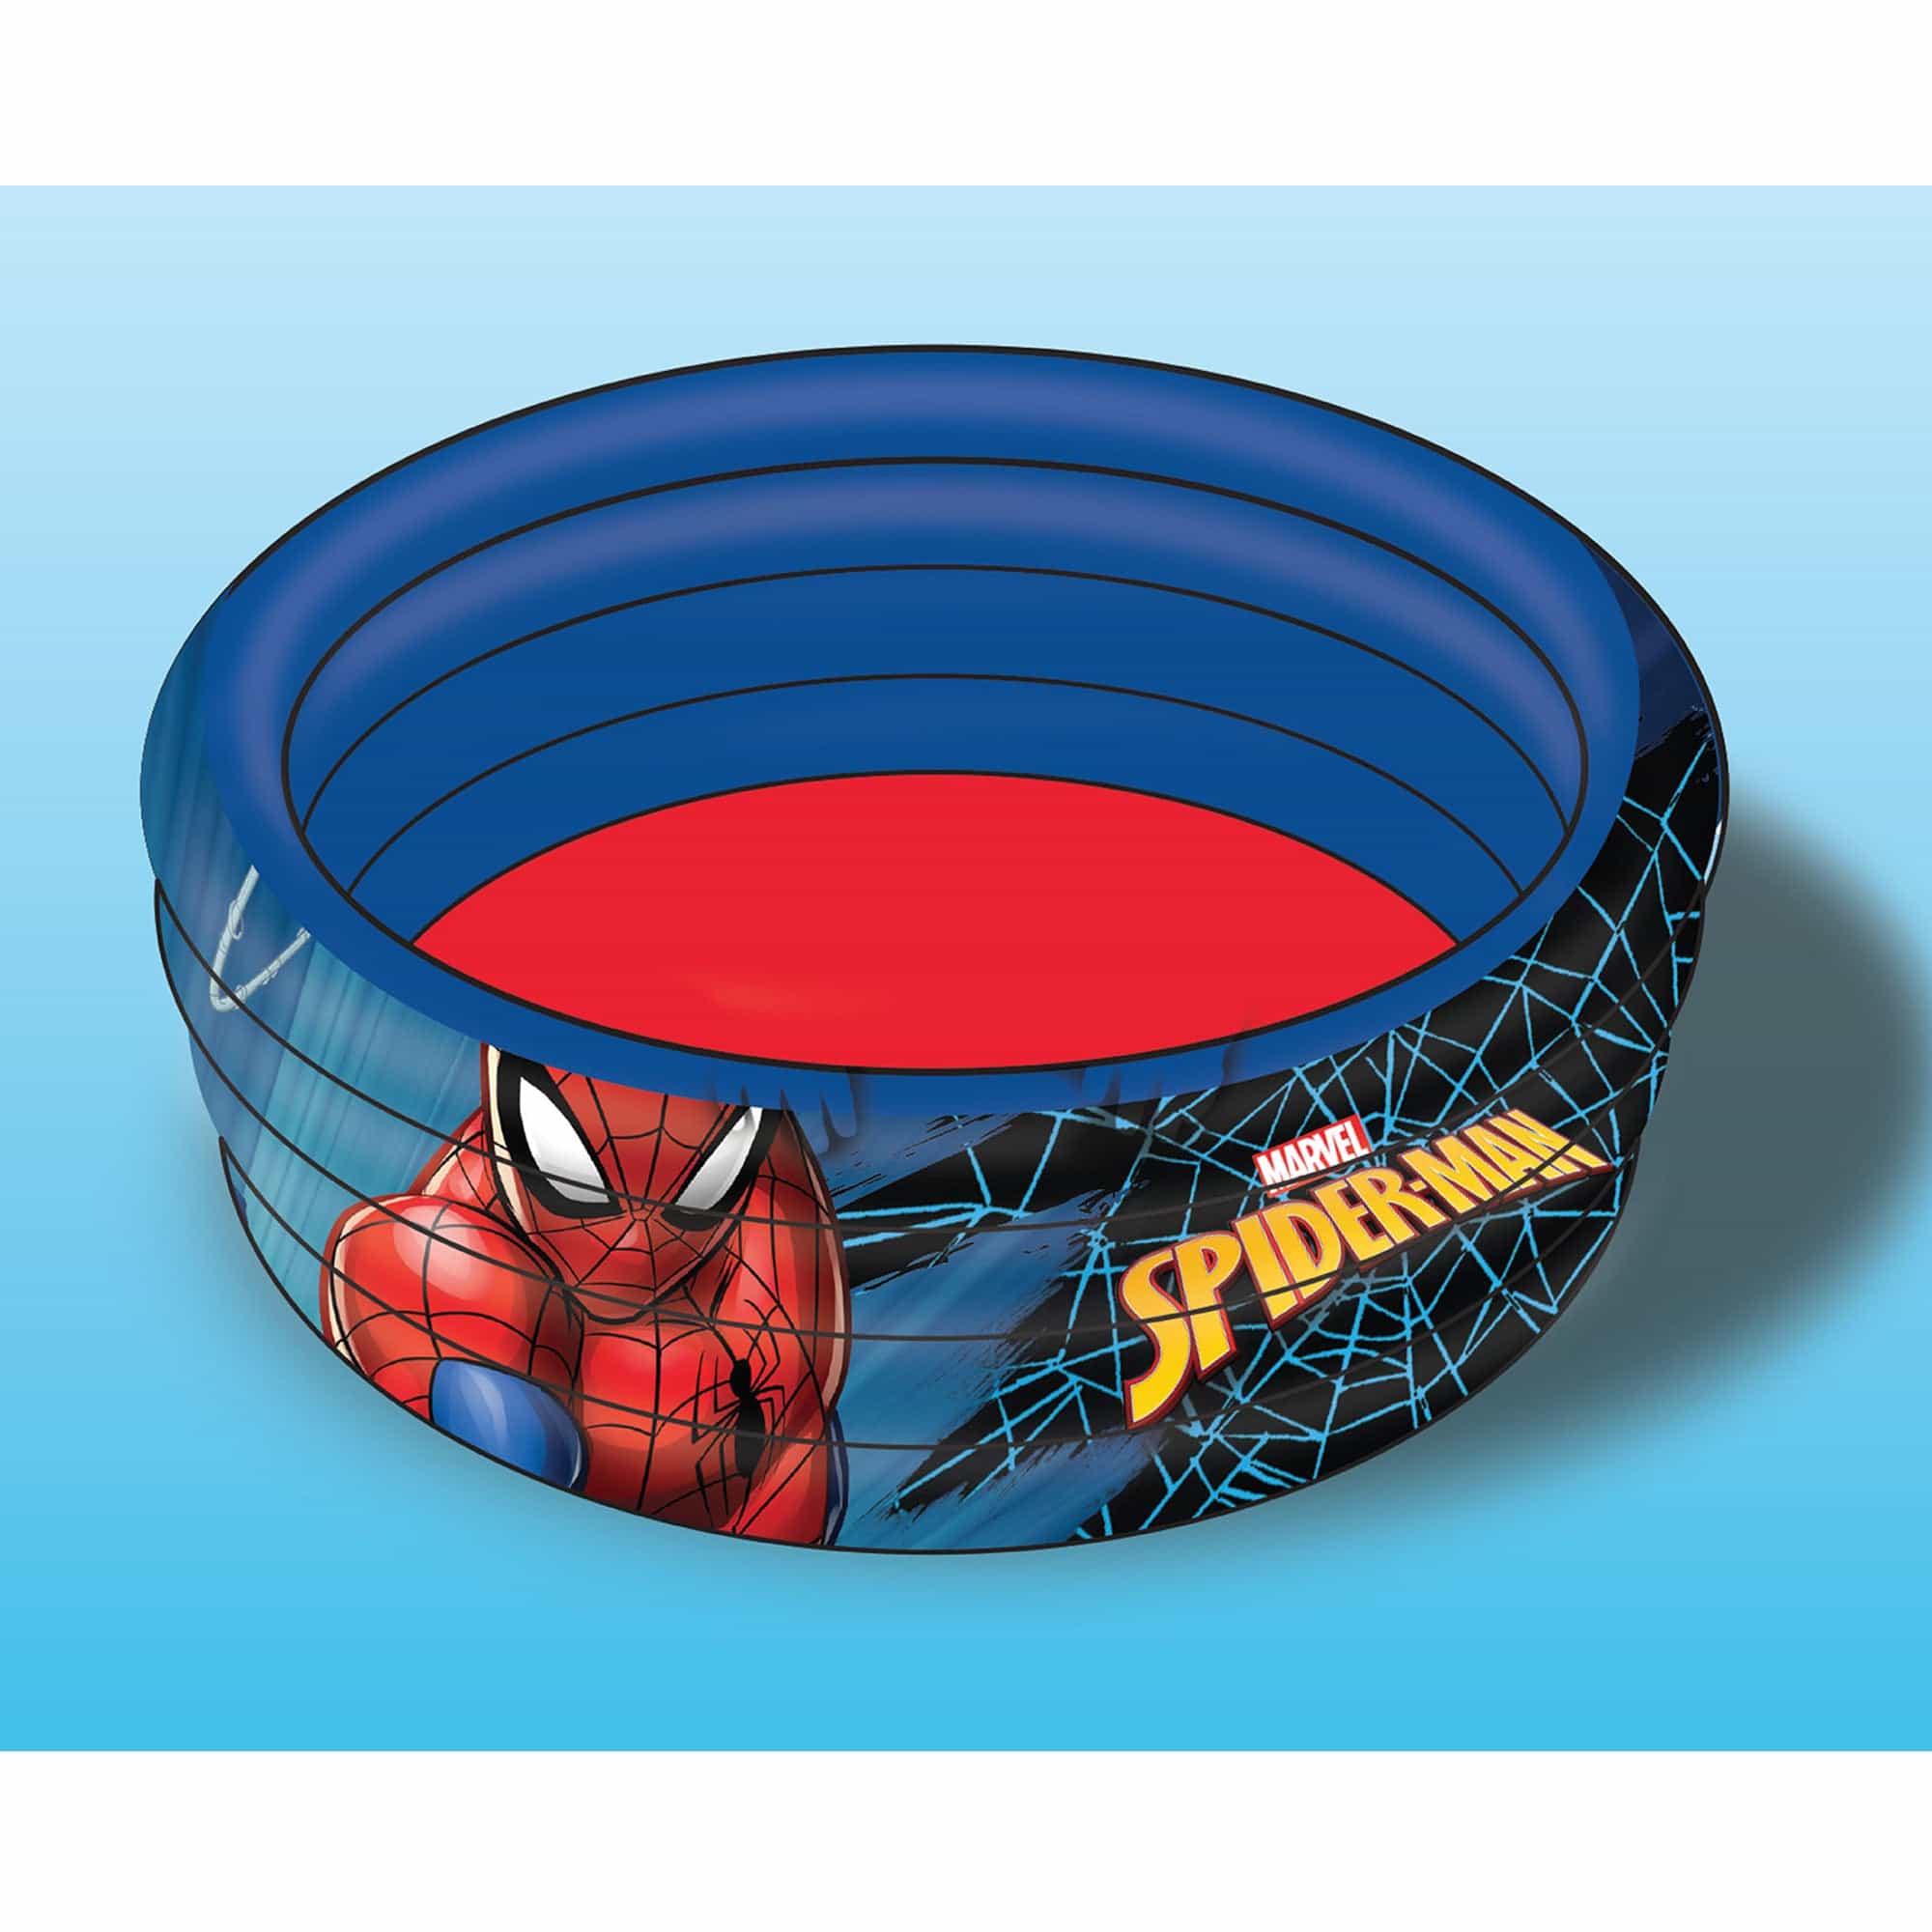 Marvel Spiderman Inflatable Swimming Pool for Kids, 3 Rings Kiddie Pool for Toddlers Infant Baby for Backyard Indoor Outdoor Pool Party Games || 3-8 Years - Toys4All.in